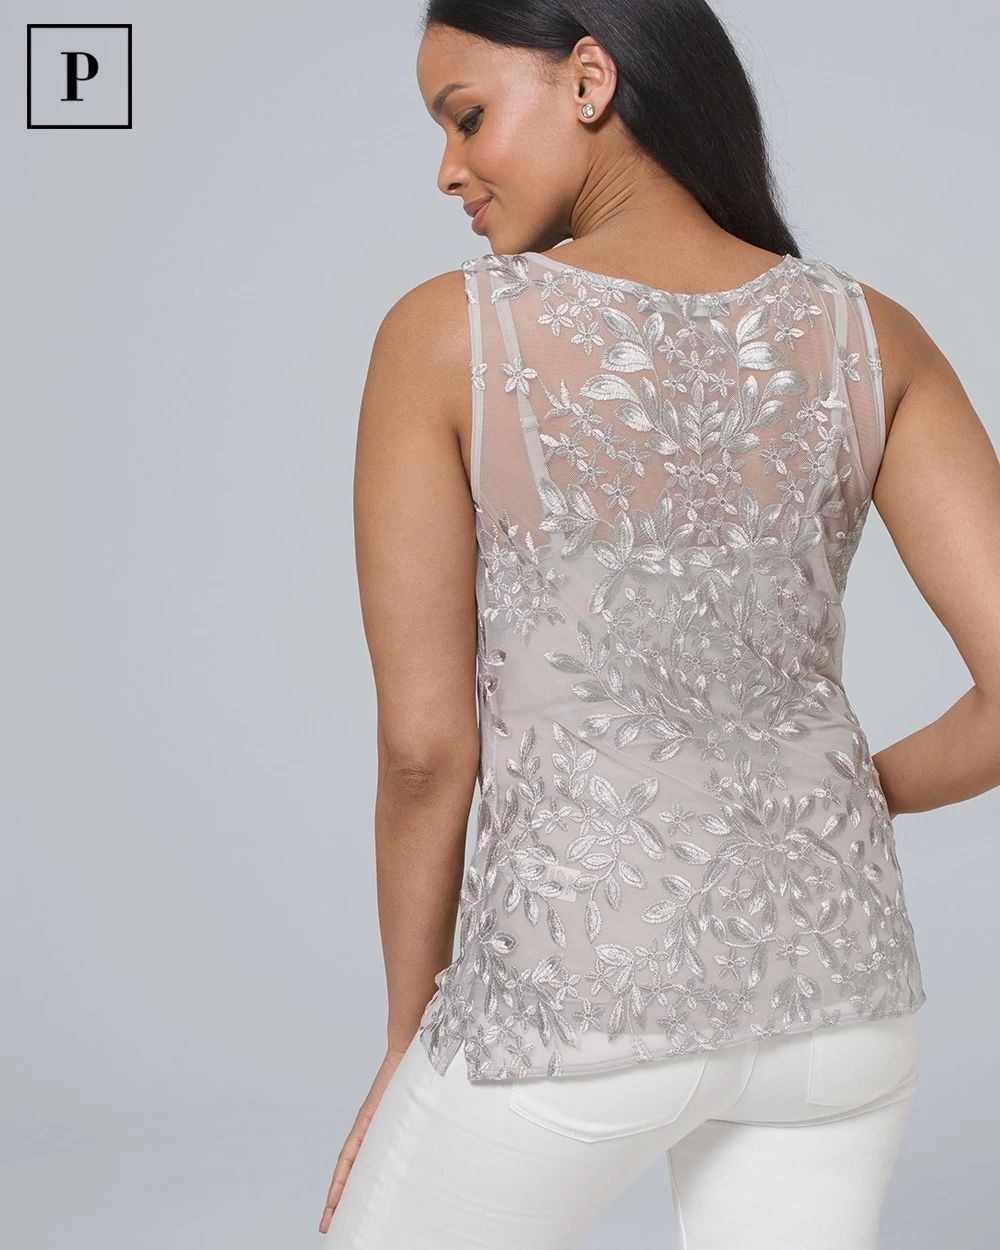 Petite Embroidered Sleeveless Top click to view larger image.